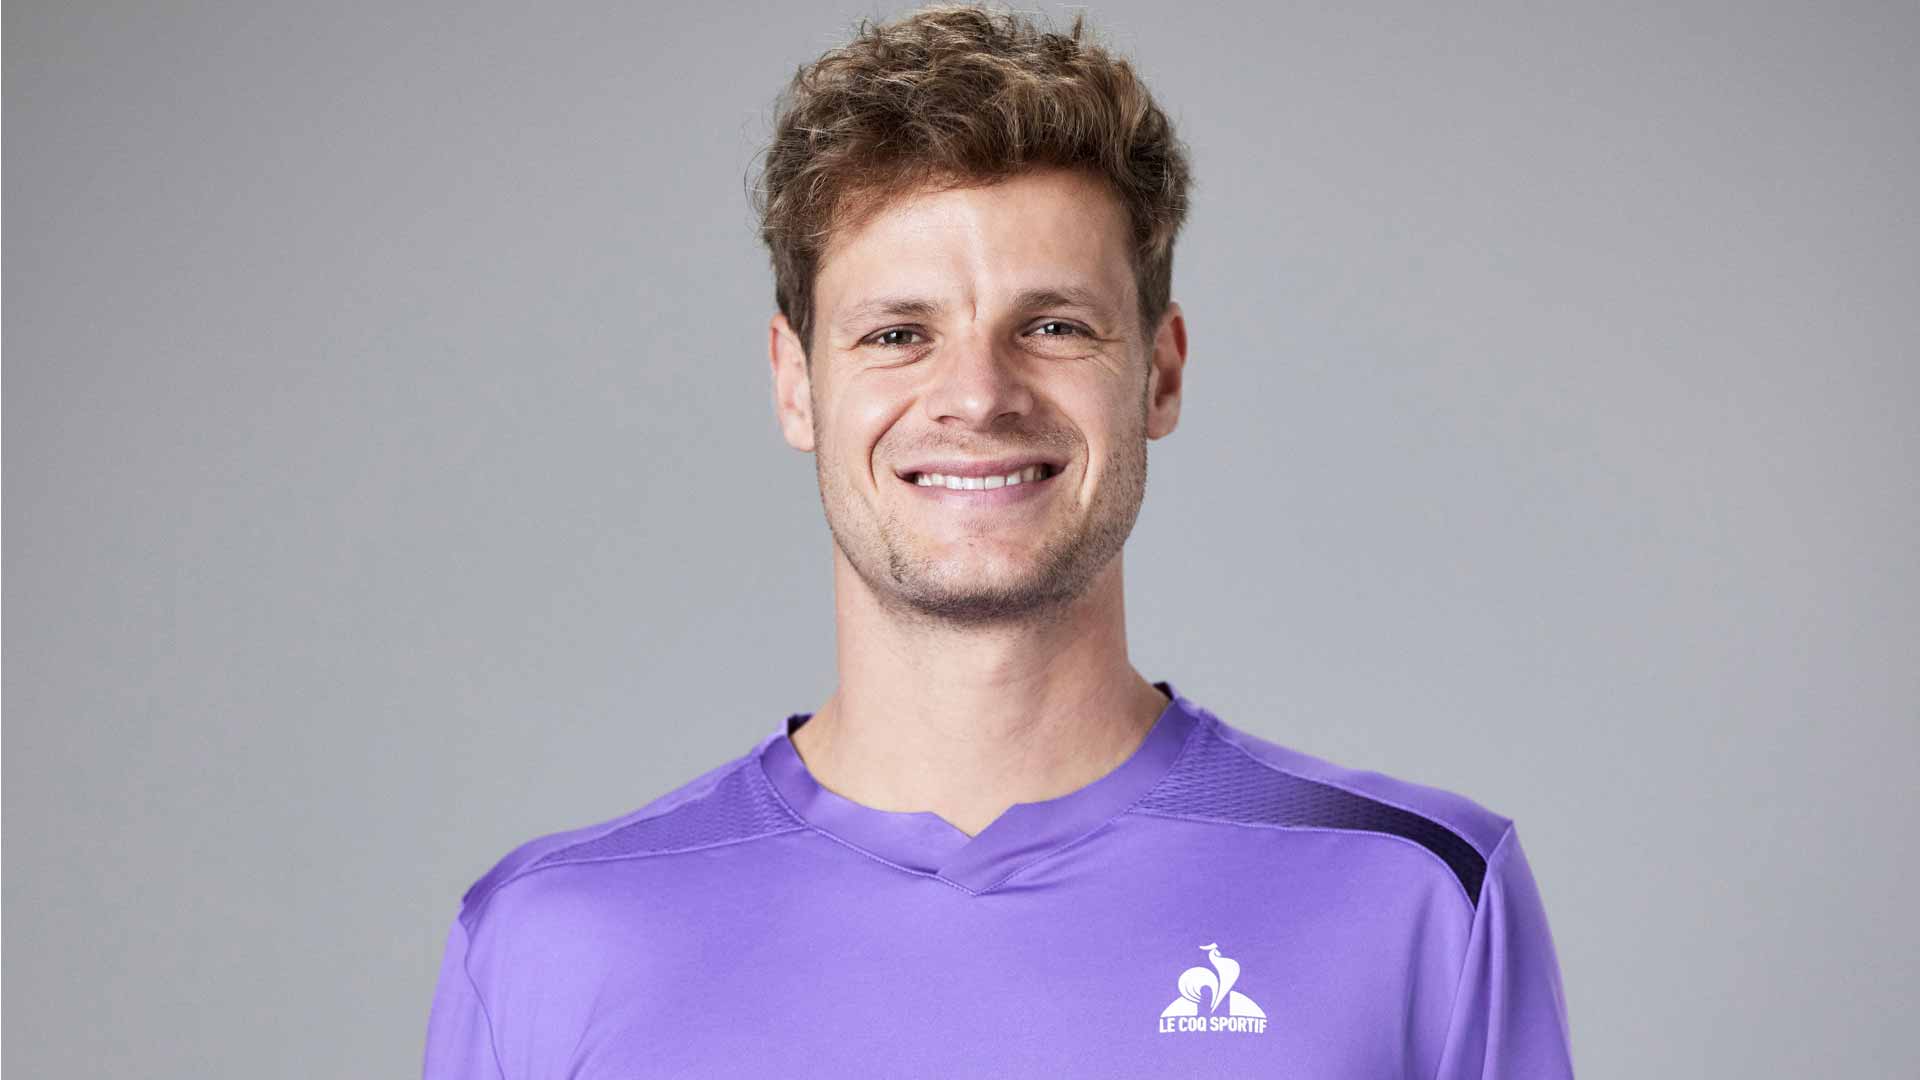 Yannick Hanfmann has climbed as high as No. 45 in the PIF ATP Rankings.